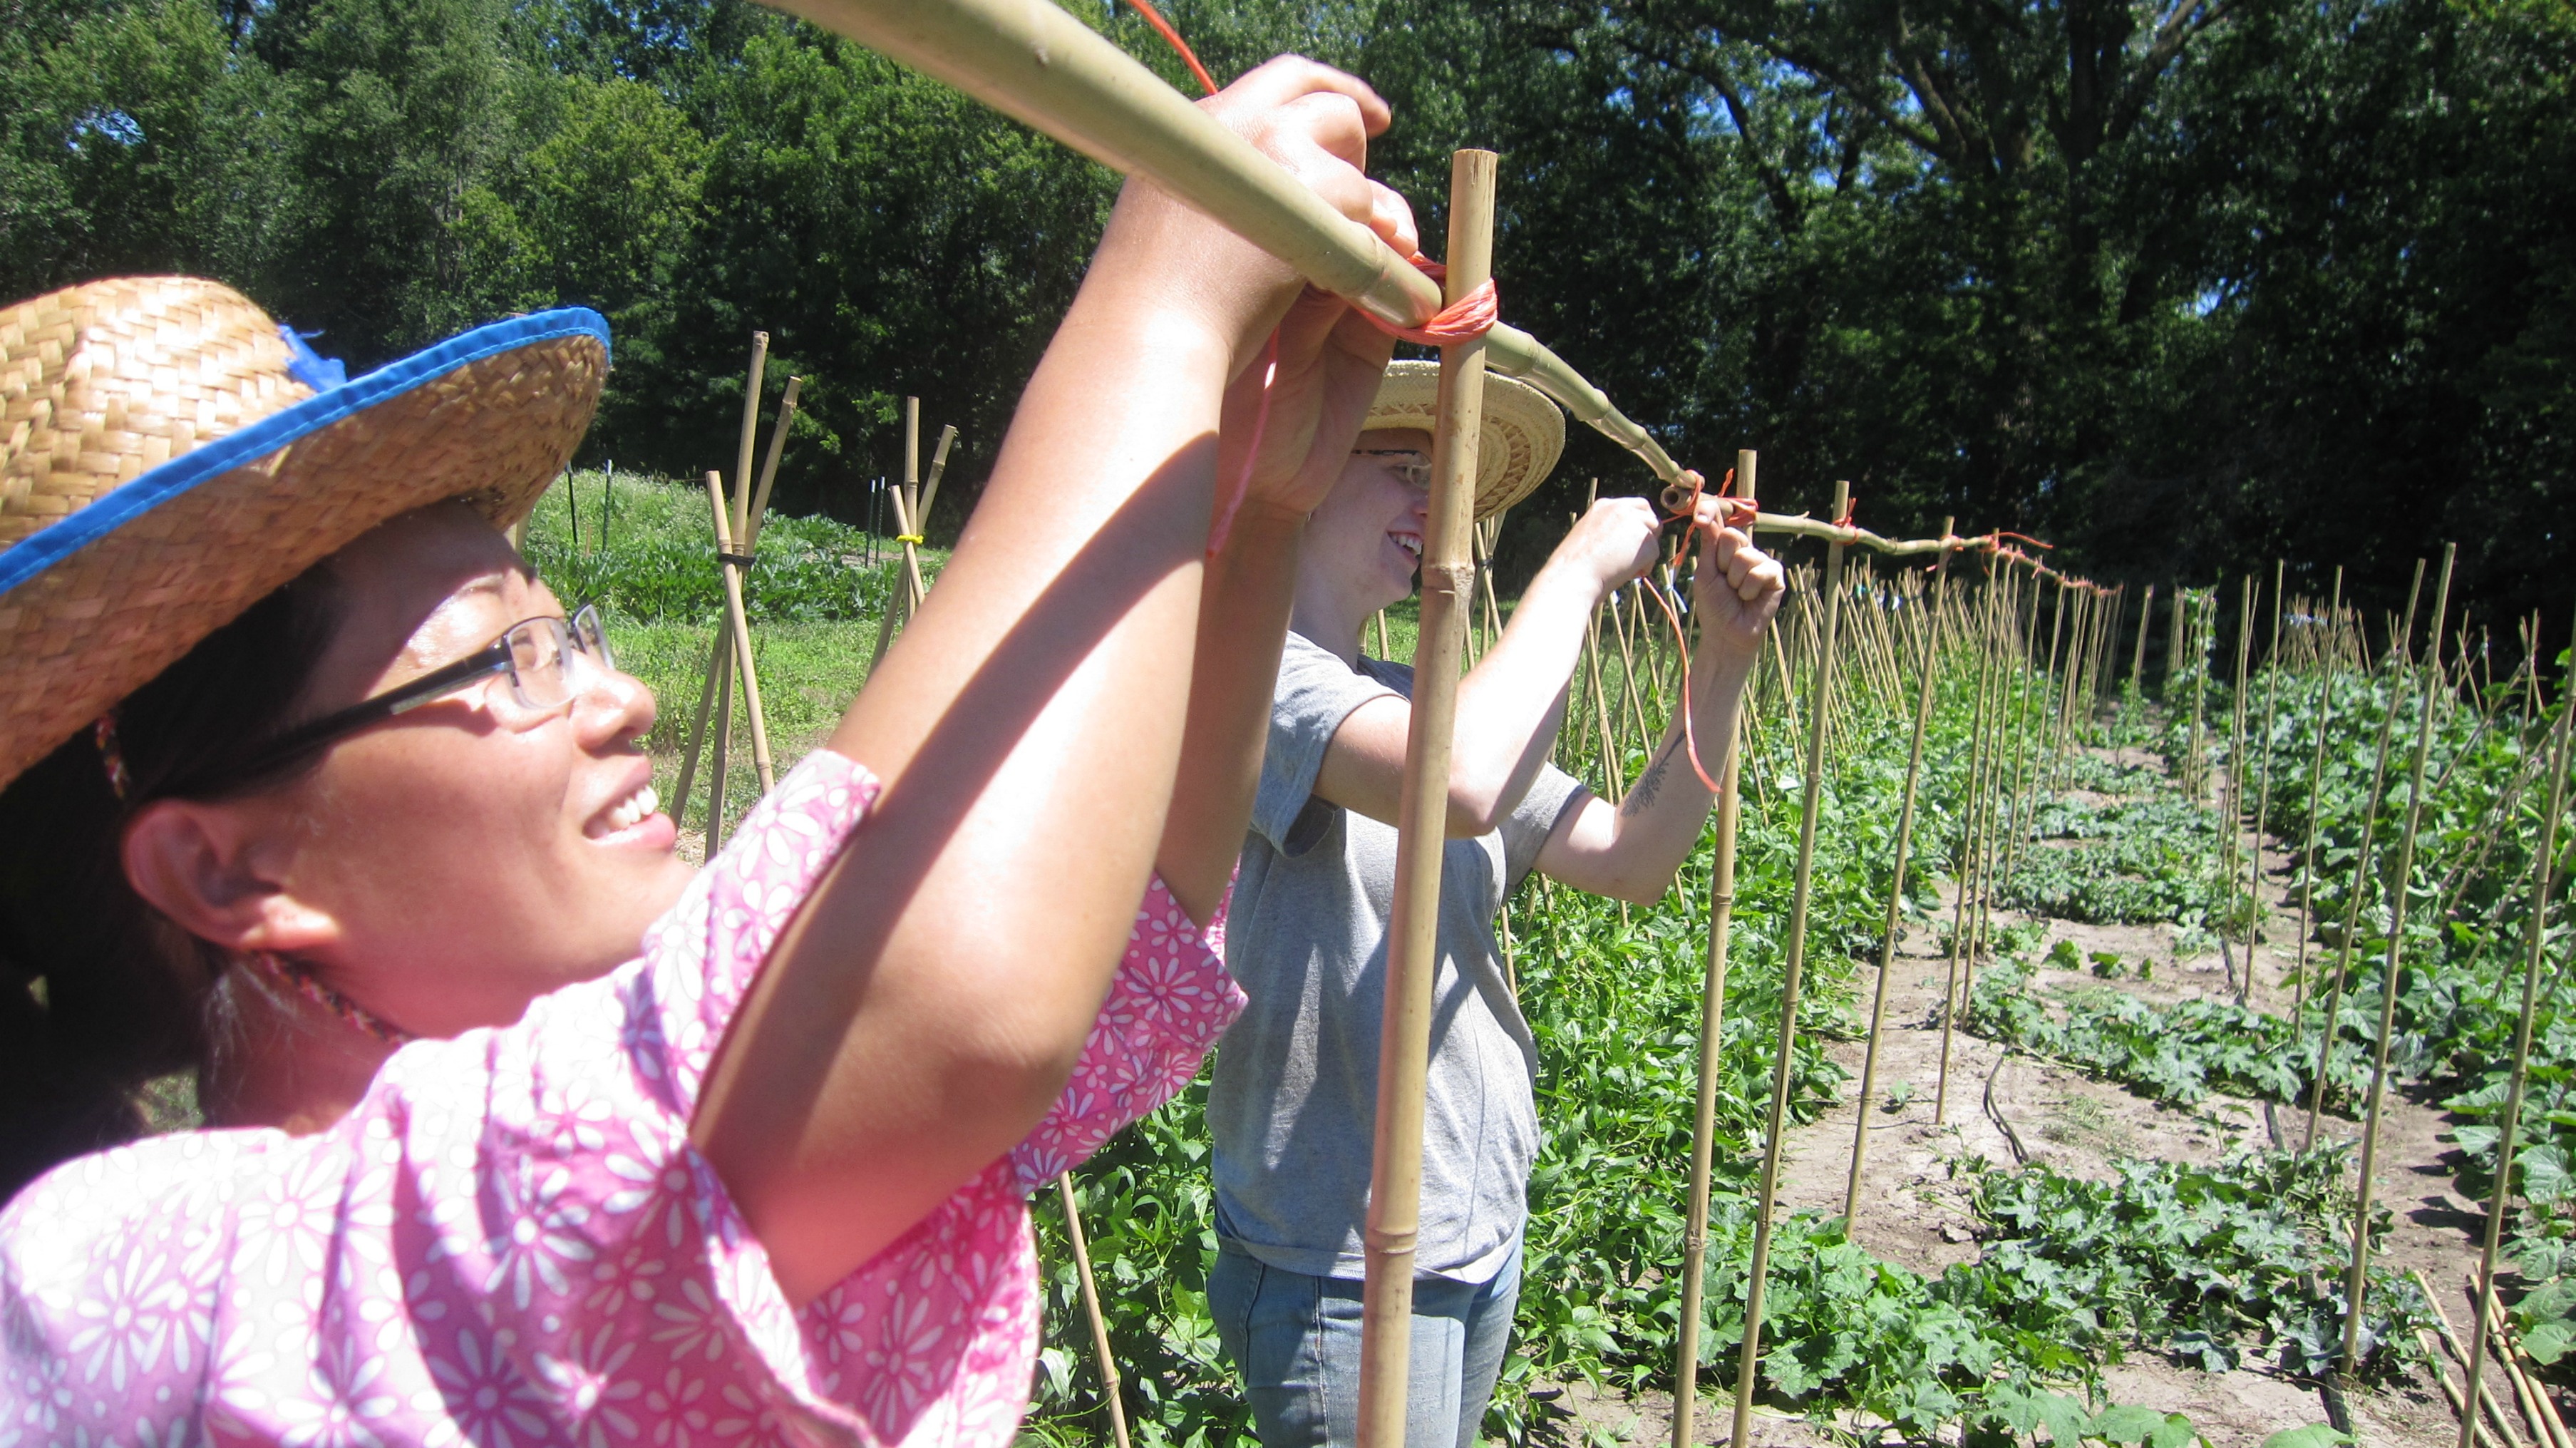 First-year grower Baoxia and AmeriCorps member Margaret install a bamboo trellis at the Community CROPS training farm.